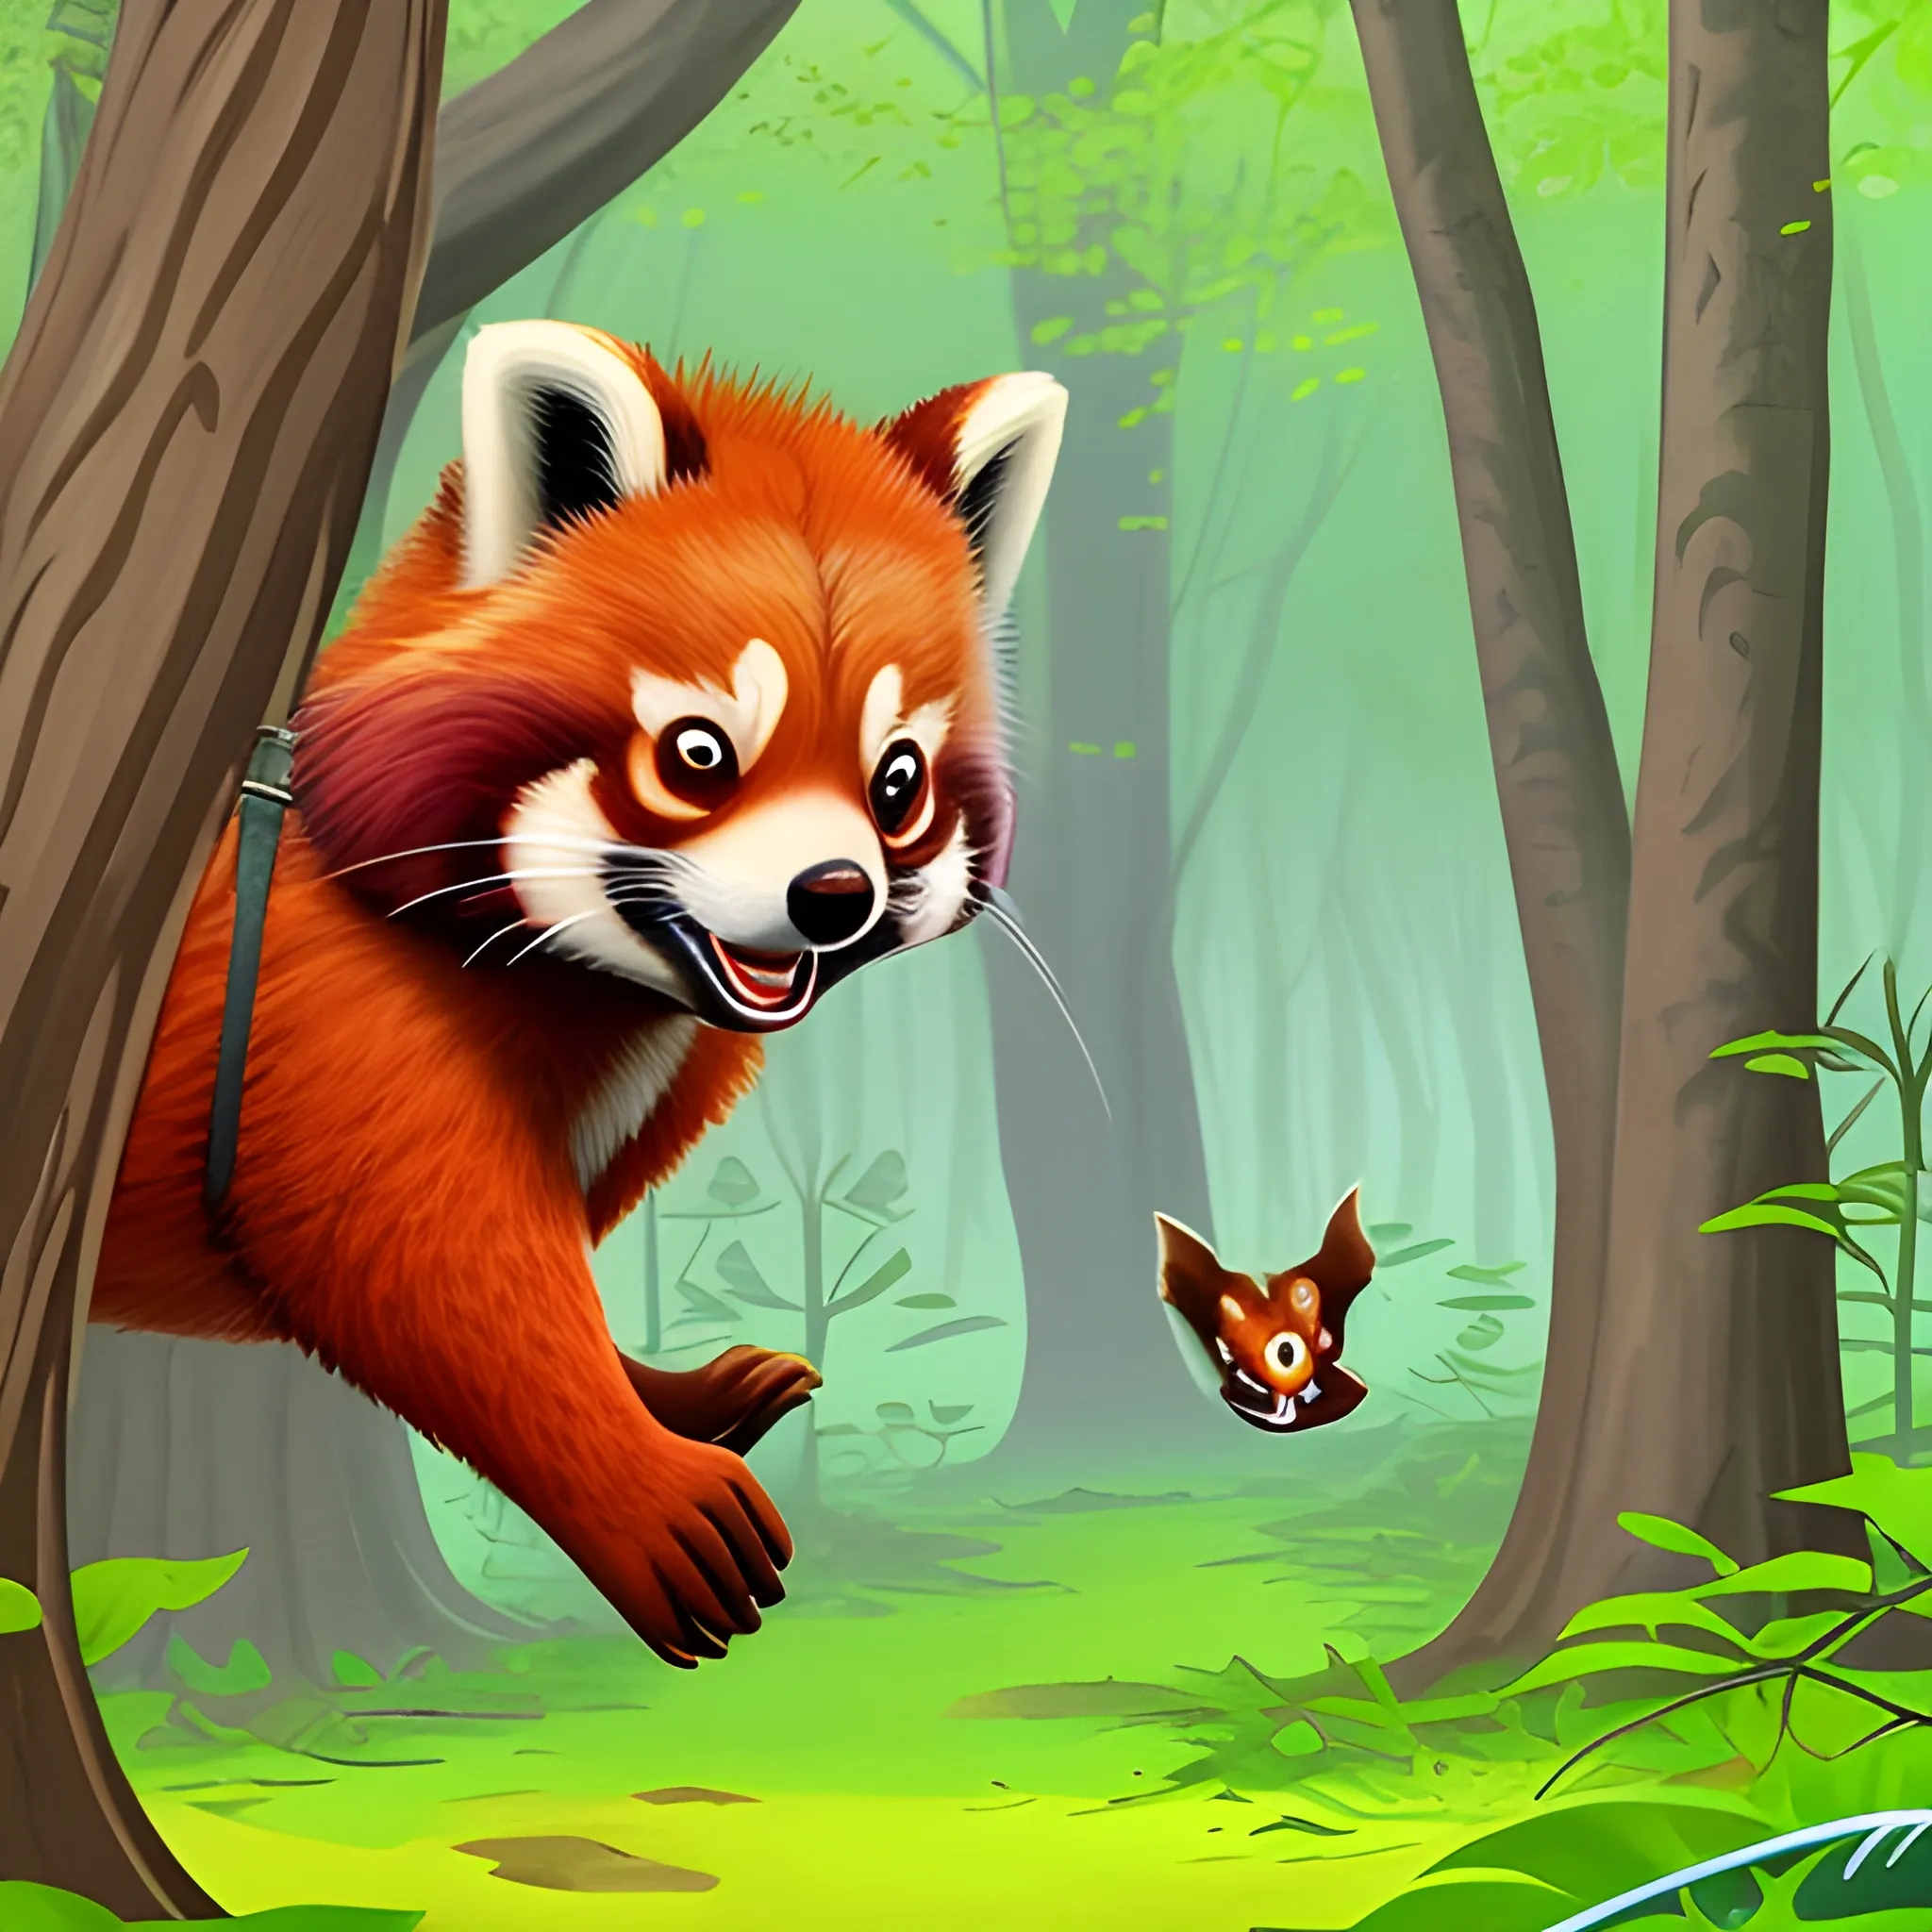 leafy forest with a Strybk-style red panda, walking through the forest children's image:
A red panda named roco runs through the forest with its tail held high. He is on his way to meet his friends for a game, 
The sun is shining brightly and the birds are singing in the trees. Strybk is happy-go-lucky.
As he walks, he stops to admire the flowers that bloom in the forest. He picks out a few and tucks them into his fur.
 He also stops to say hello to the other animals he meets on the way. The squirrels chatter to him from the trees
Finally, Strybk reaches the clearing where his friends are waiting. They all greet him with a smile and begin to play tag.
They run, laugh and chase each other through the forest. They are having so much fun that they don't even notice the time that passes.
When it's time to go home, Strybk is tired but happy. He has had a wonderful day playing with his friends.
He knows that tomorrow they will do it all over again.
